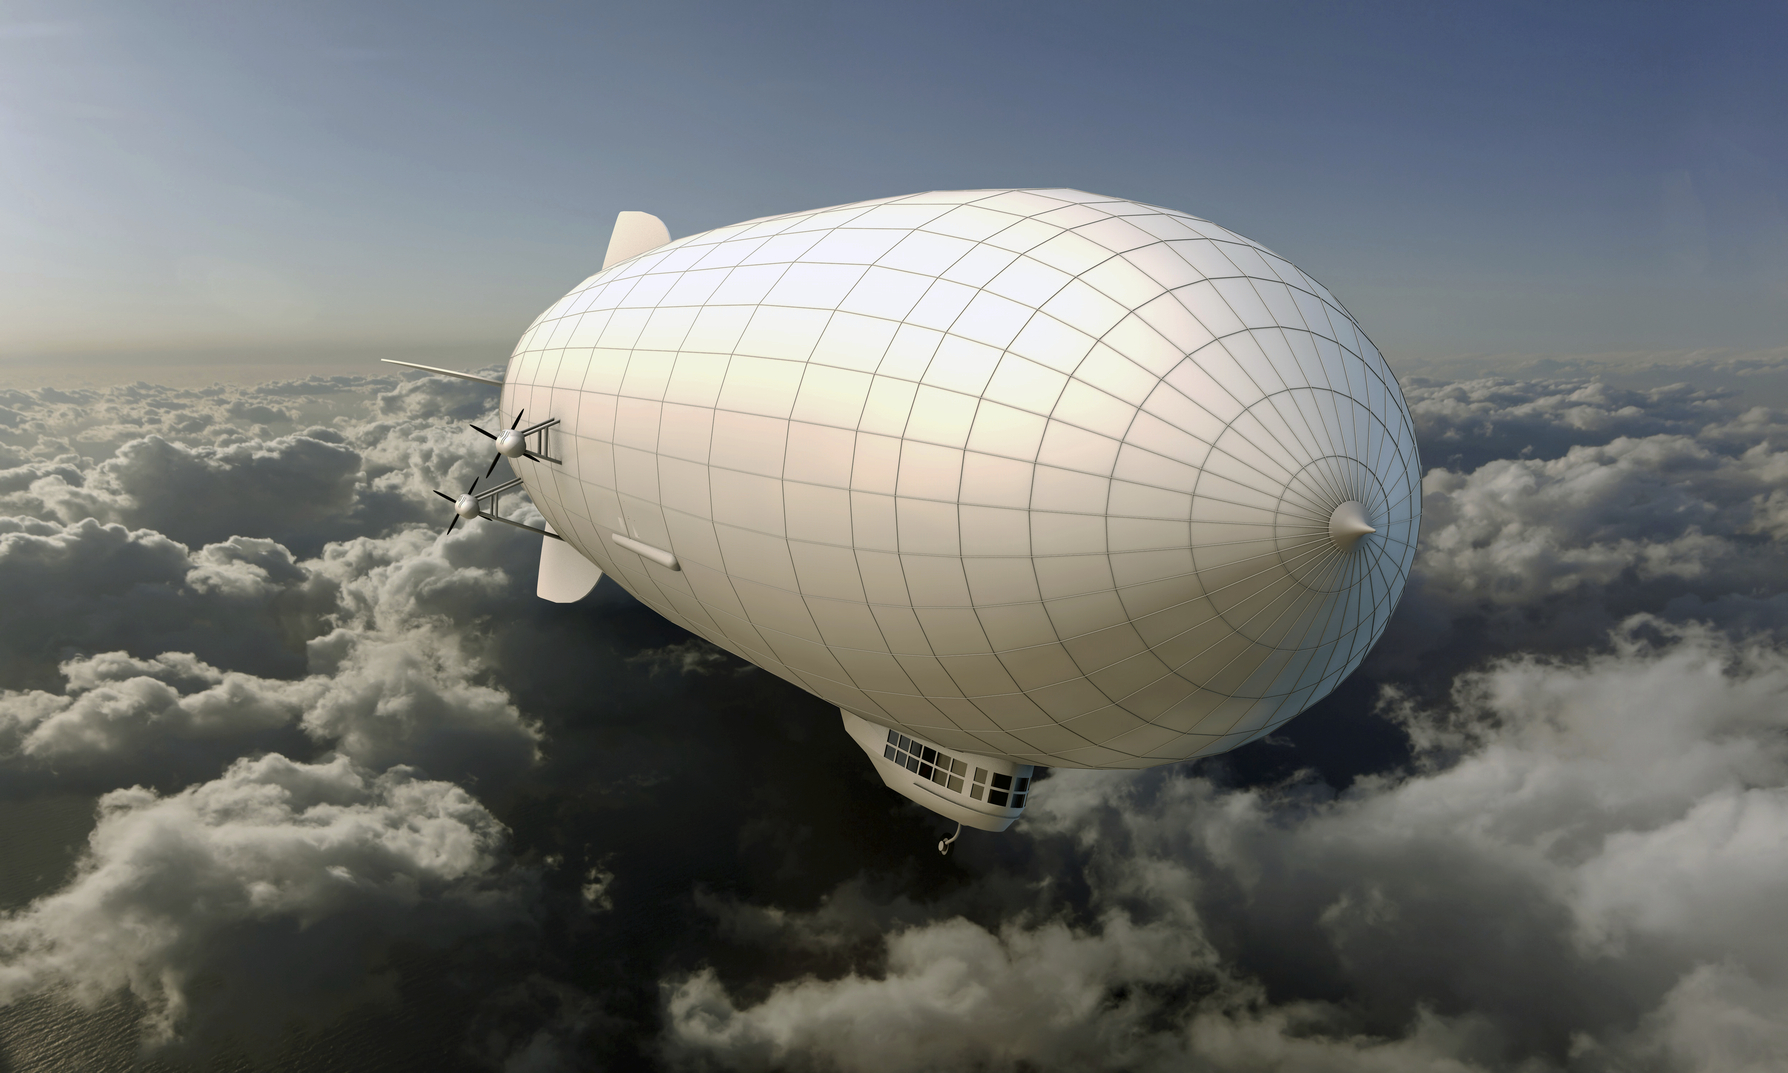 Airship flying in the sky